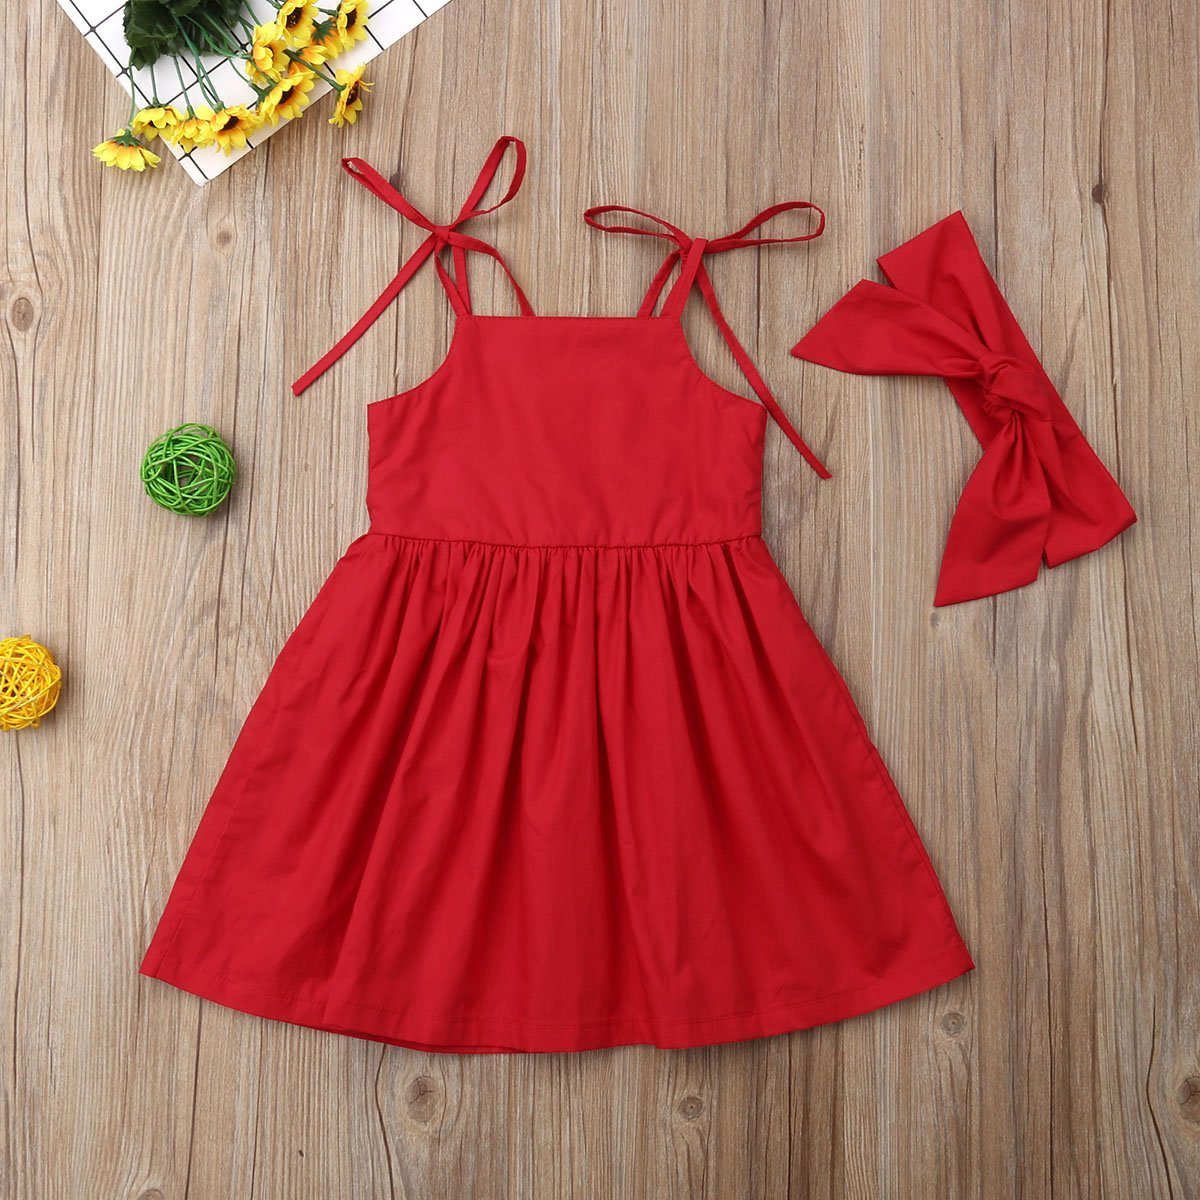 Cute As a Button Dress with Headband (2 Colors)